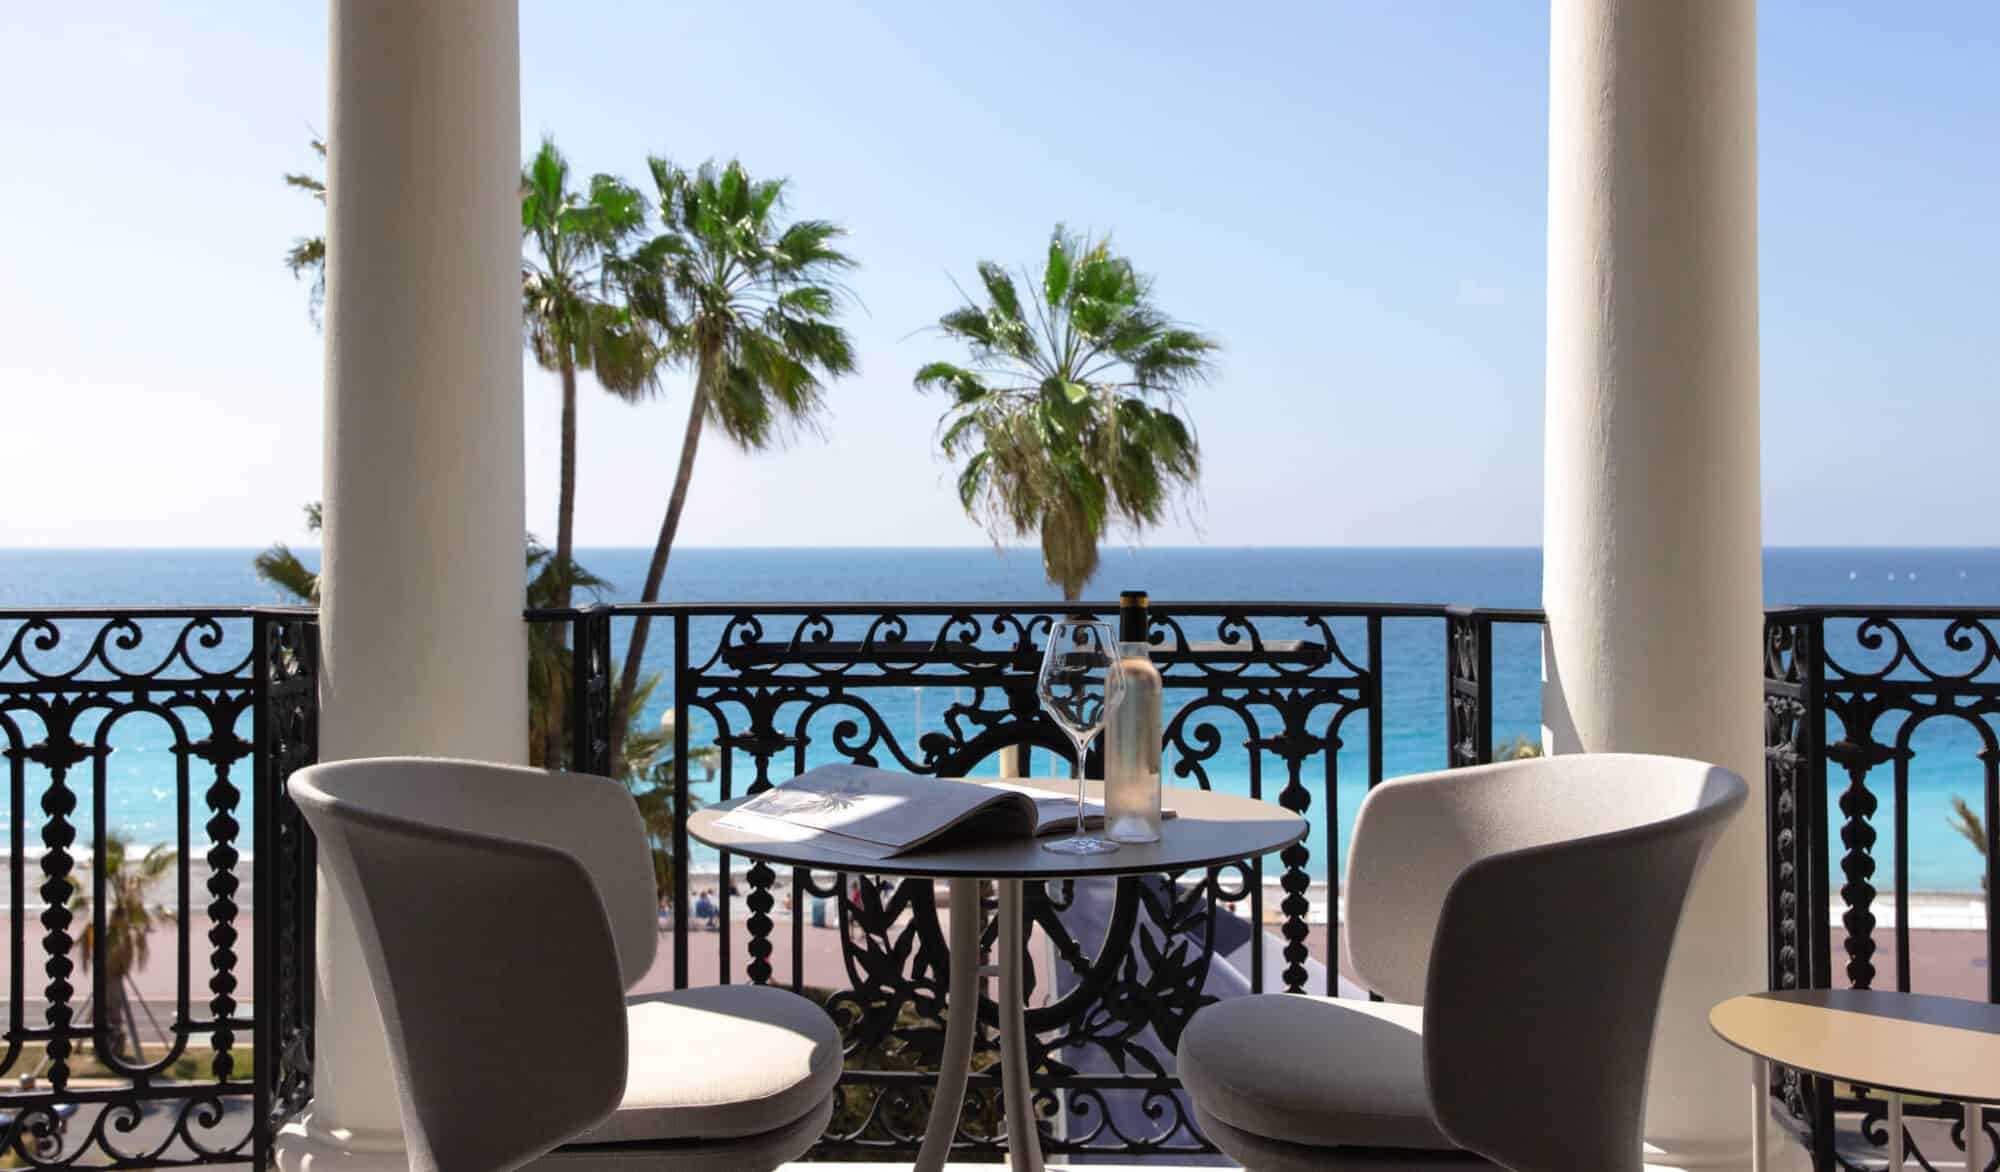 A sunny balcony of a suite from L'Hotel Negresco with a view of the beach and a few palm trees. There sits a table for two on the balcony with a black iron railing, a book and a bottle of wine waiting for an occupant.